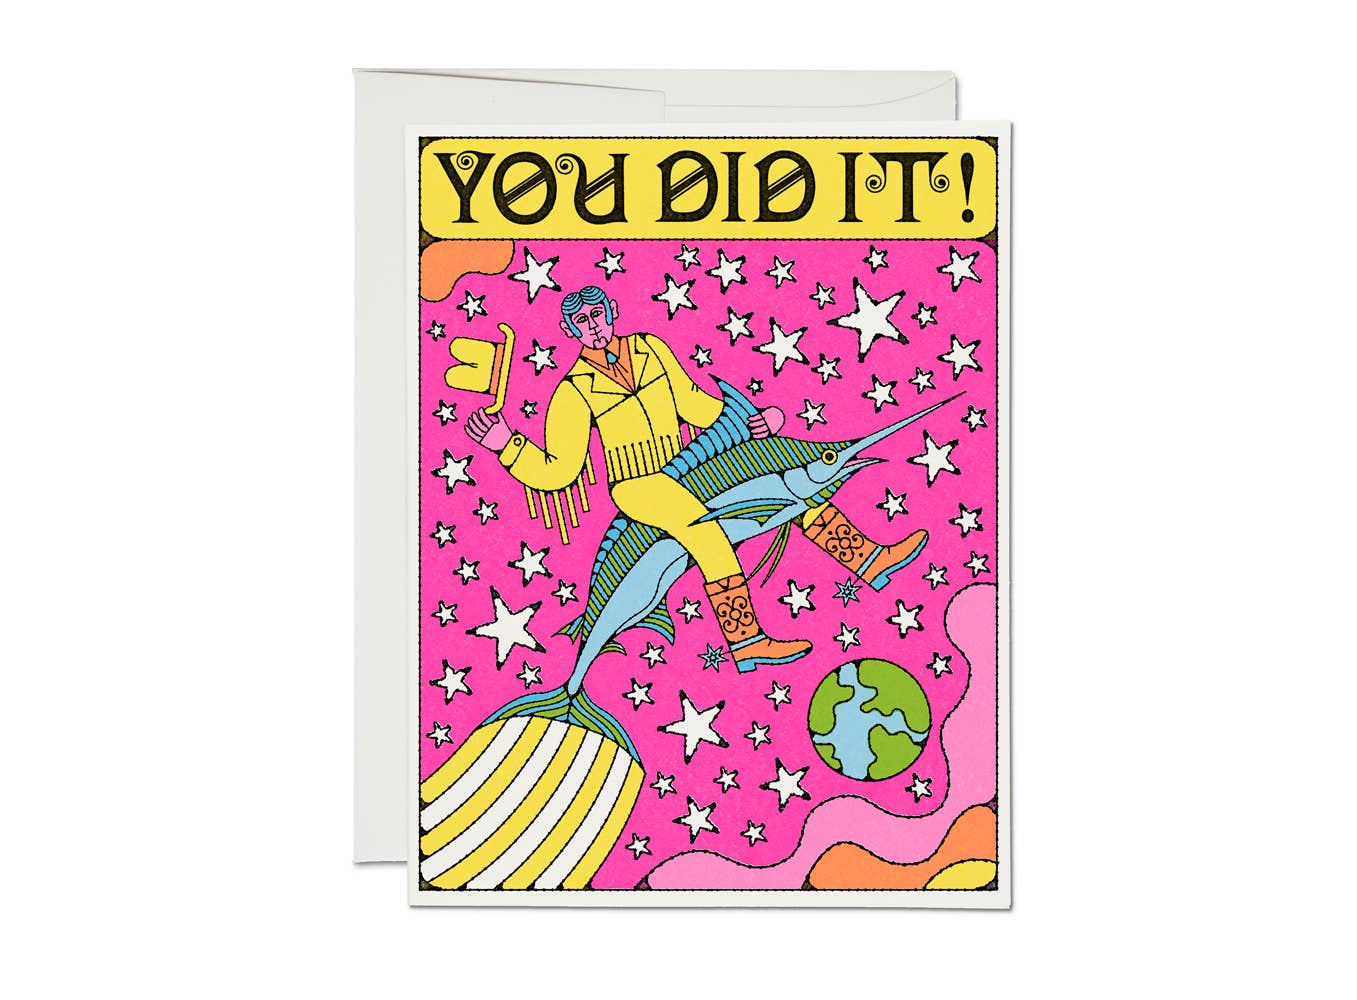 Cowboy riding a marlin through outer space greeting card with "You Did It!" text